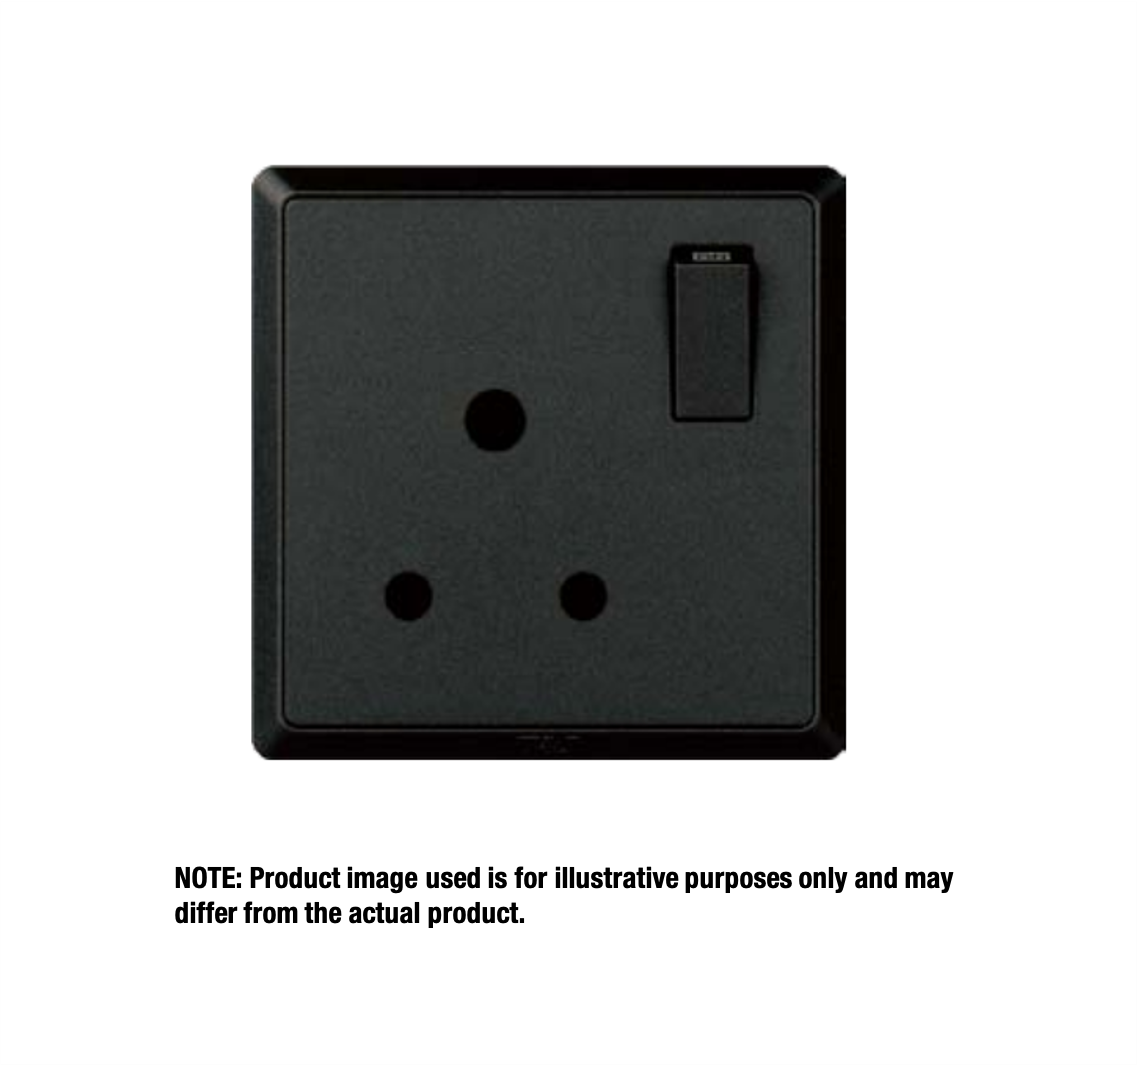 INFINIT - 20A 2 Gang Double Pole Switch with LED Indicator (Charcoal Black)